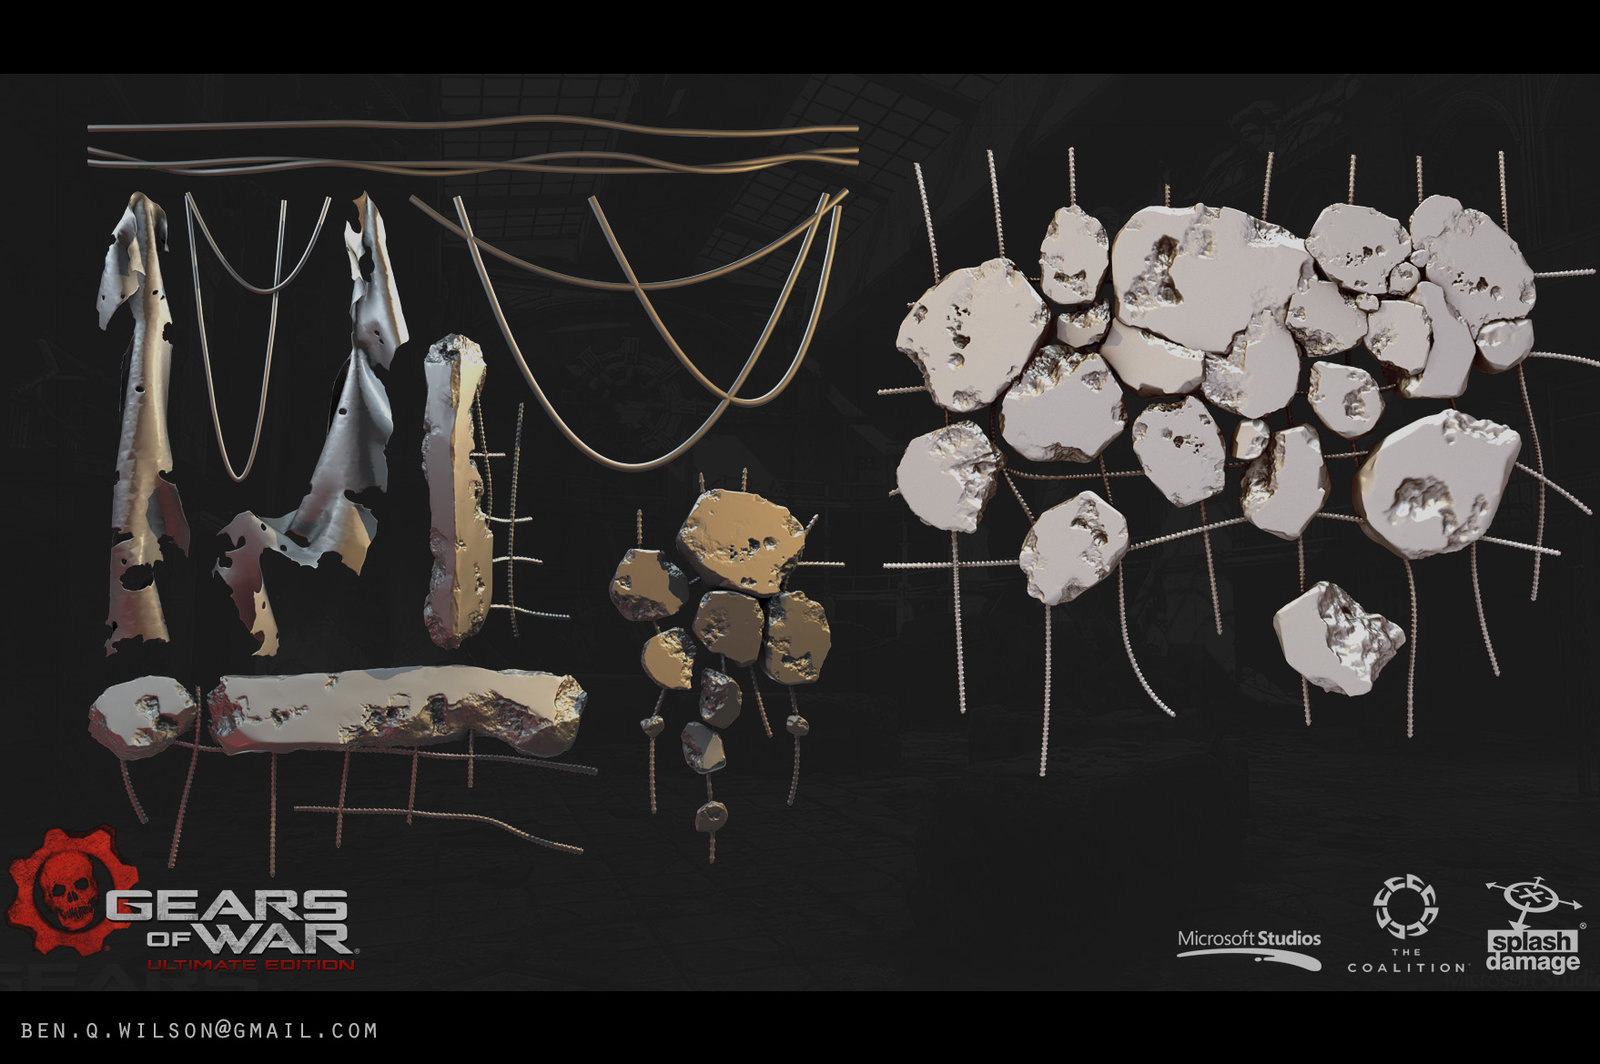 Some more examples of assets I created for the rubble collection. These were baked down and used as decals.